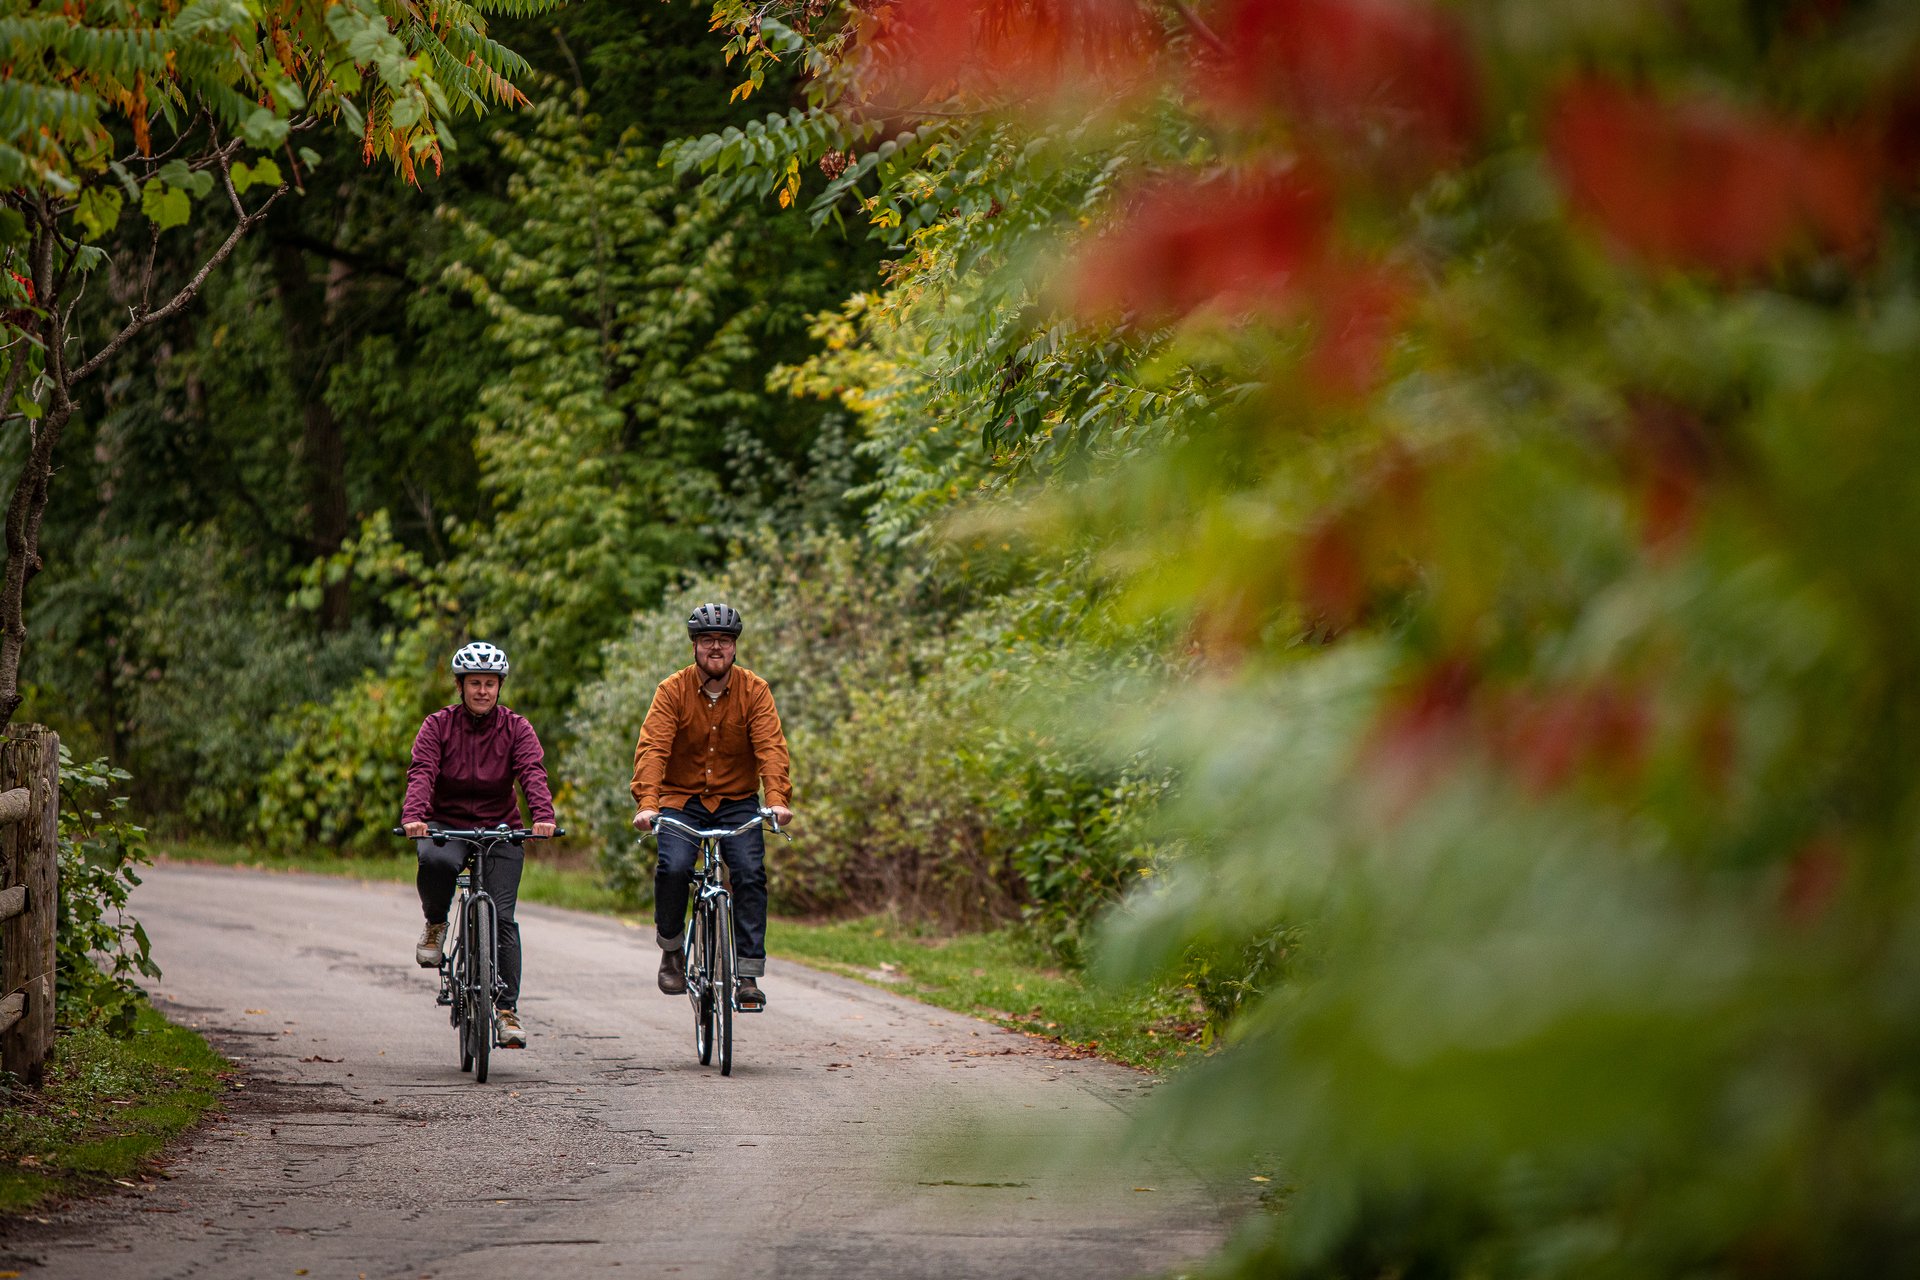 man and woman ride along a rustic roadway with sumac in foreground